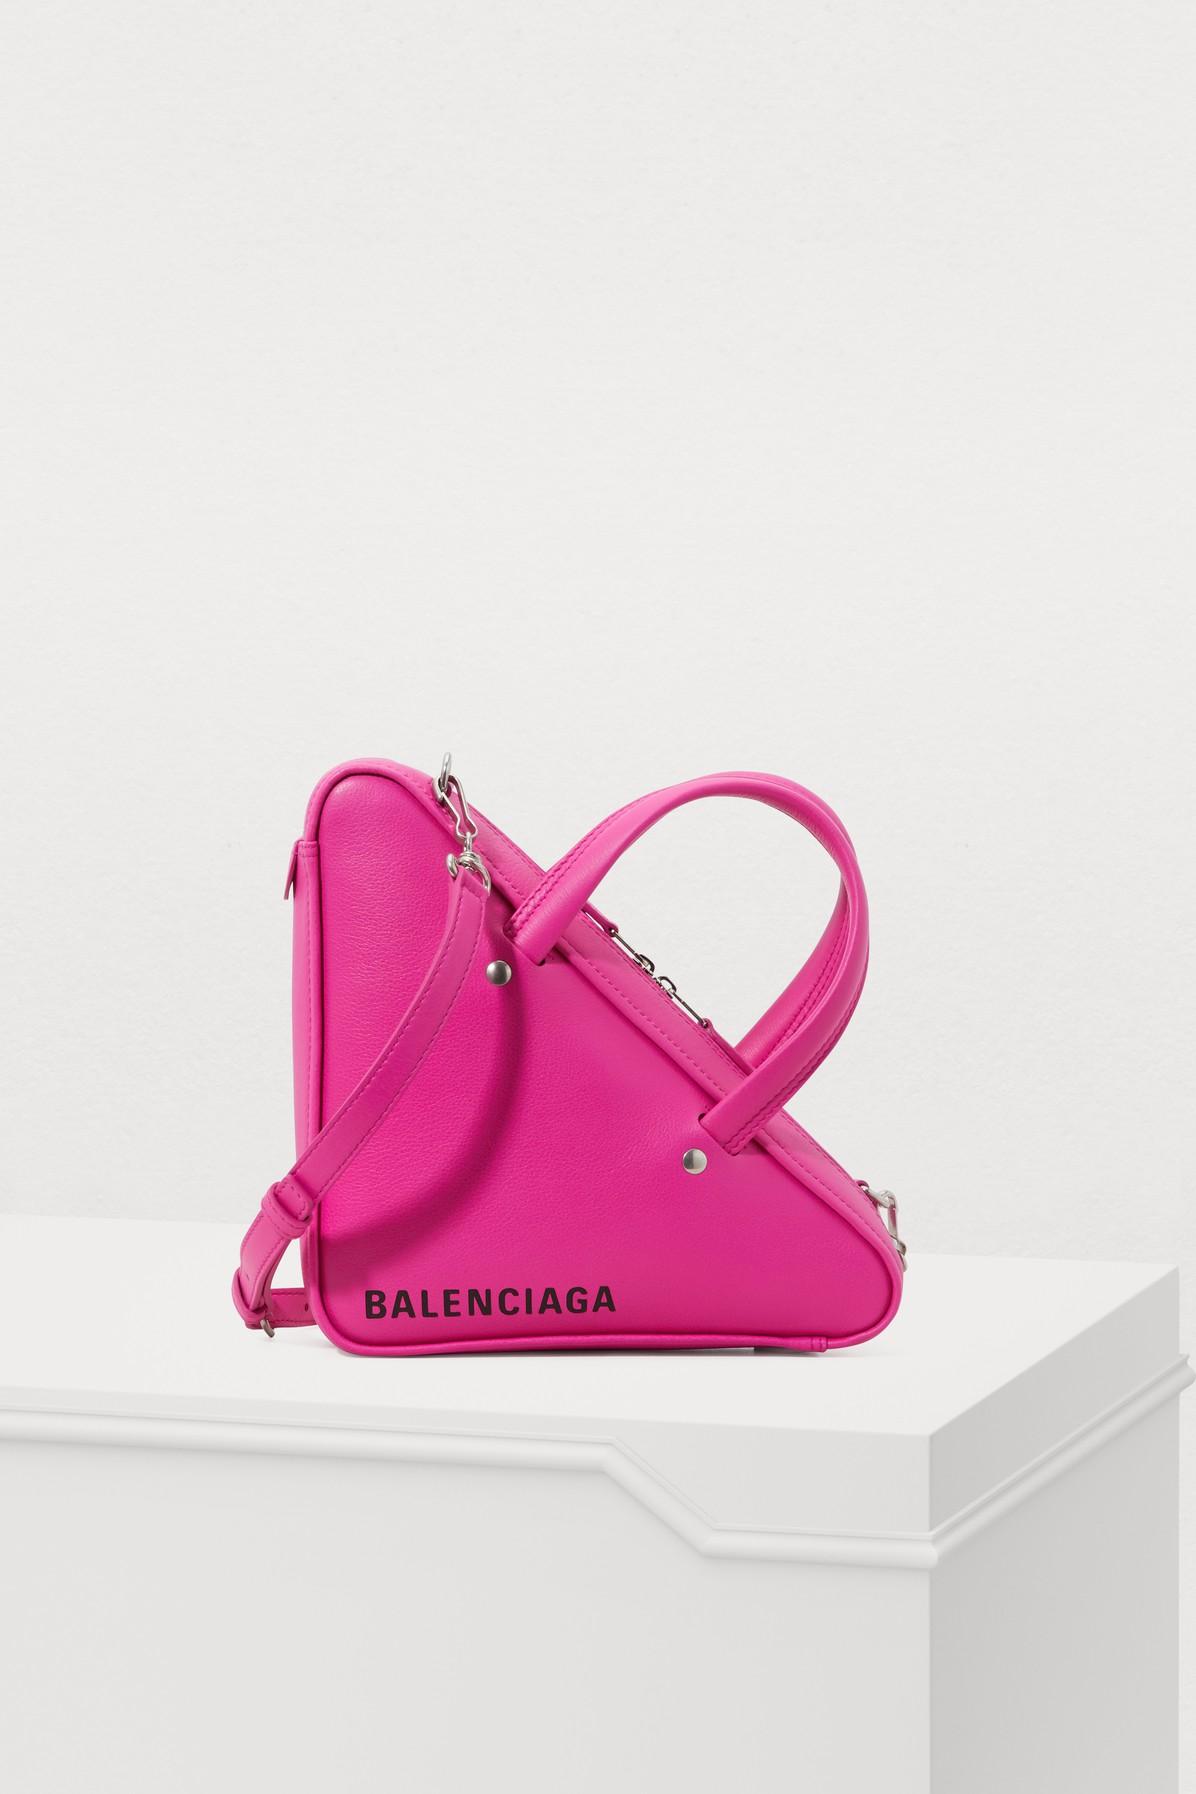 Balenciaga Triangle Duffle Xs Leather Tote in Pink - Lyst